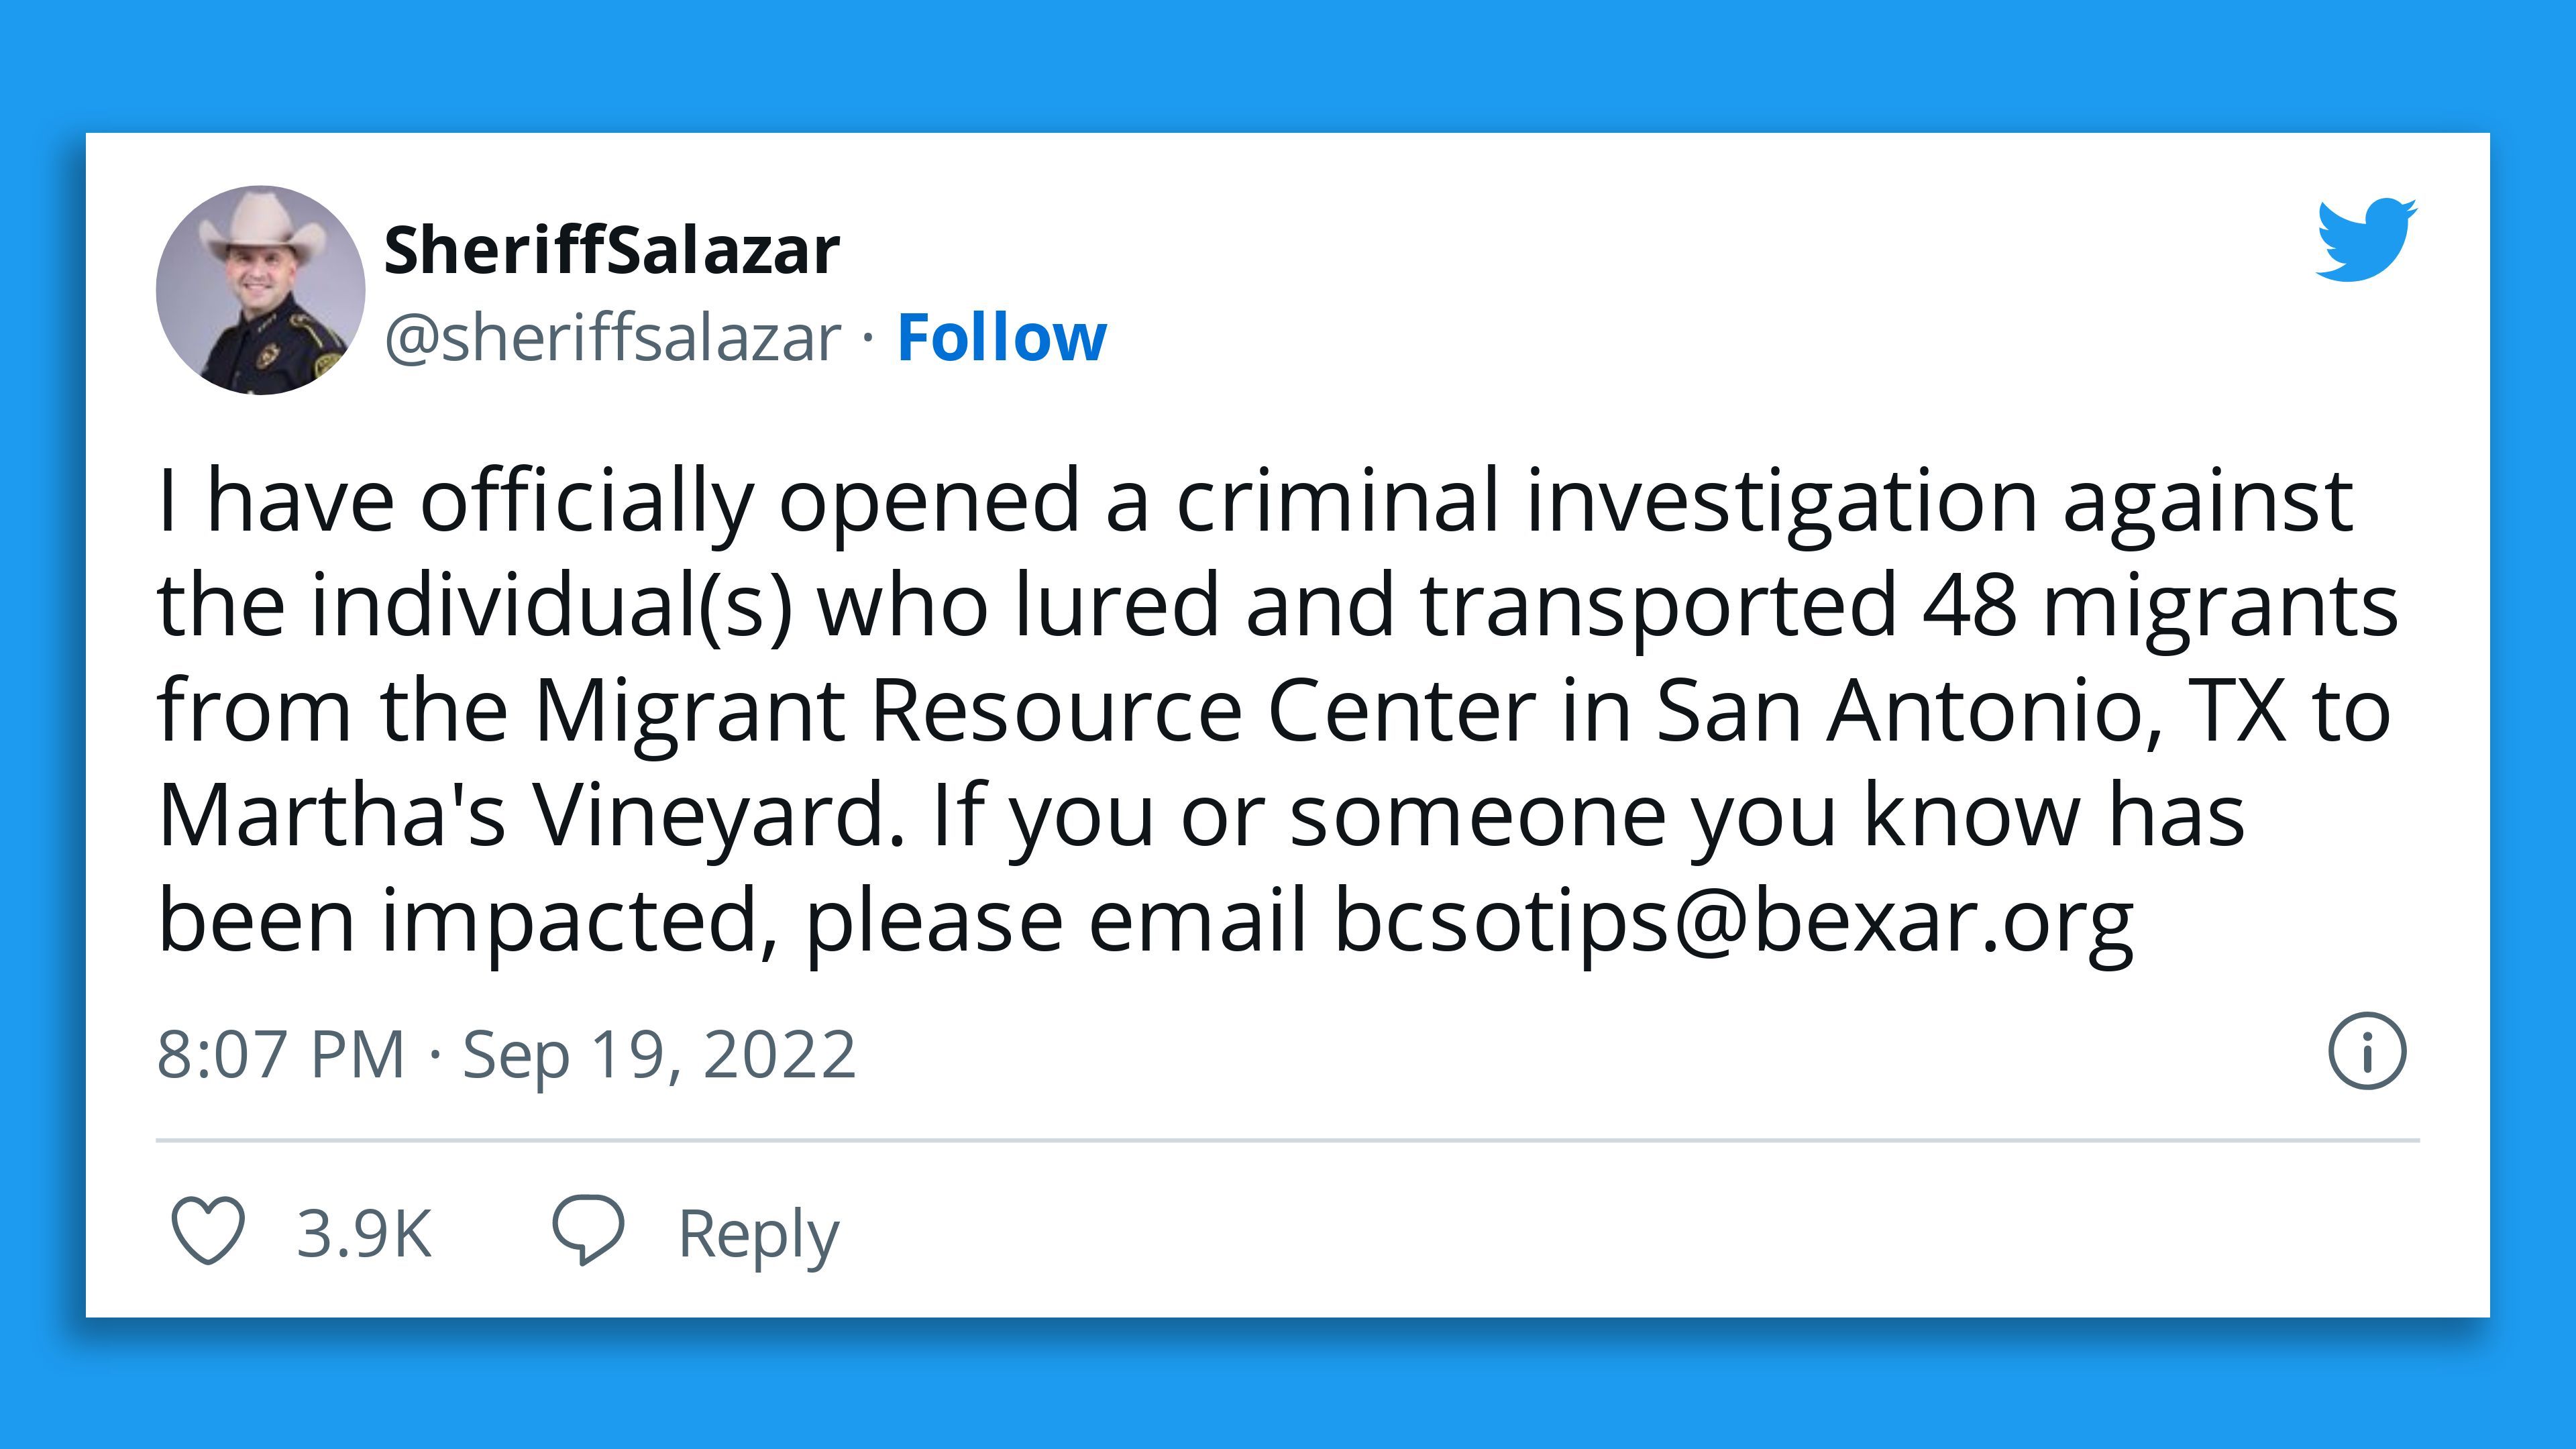 A tweet by the Bexar County sheriff announcing a criminal investigation into the Florida governor organizing migrant flights to Mass. via San Antonio.